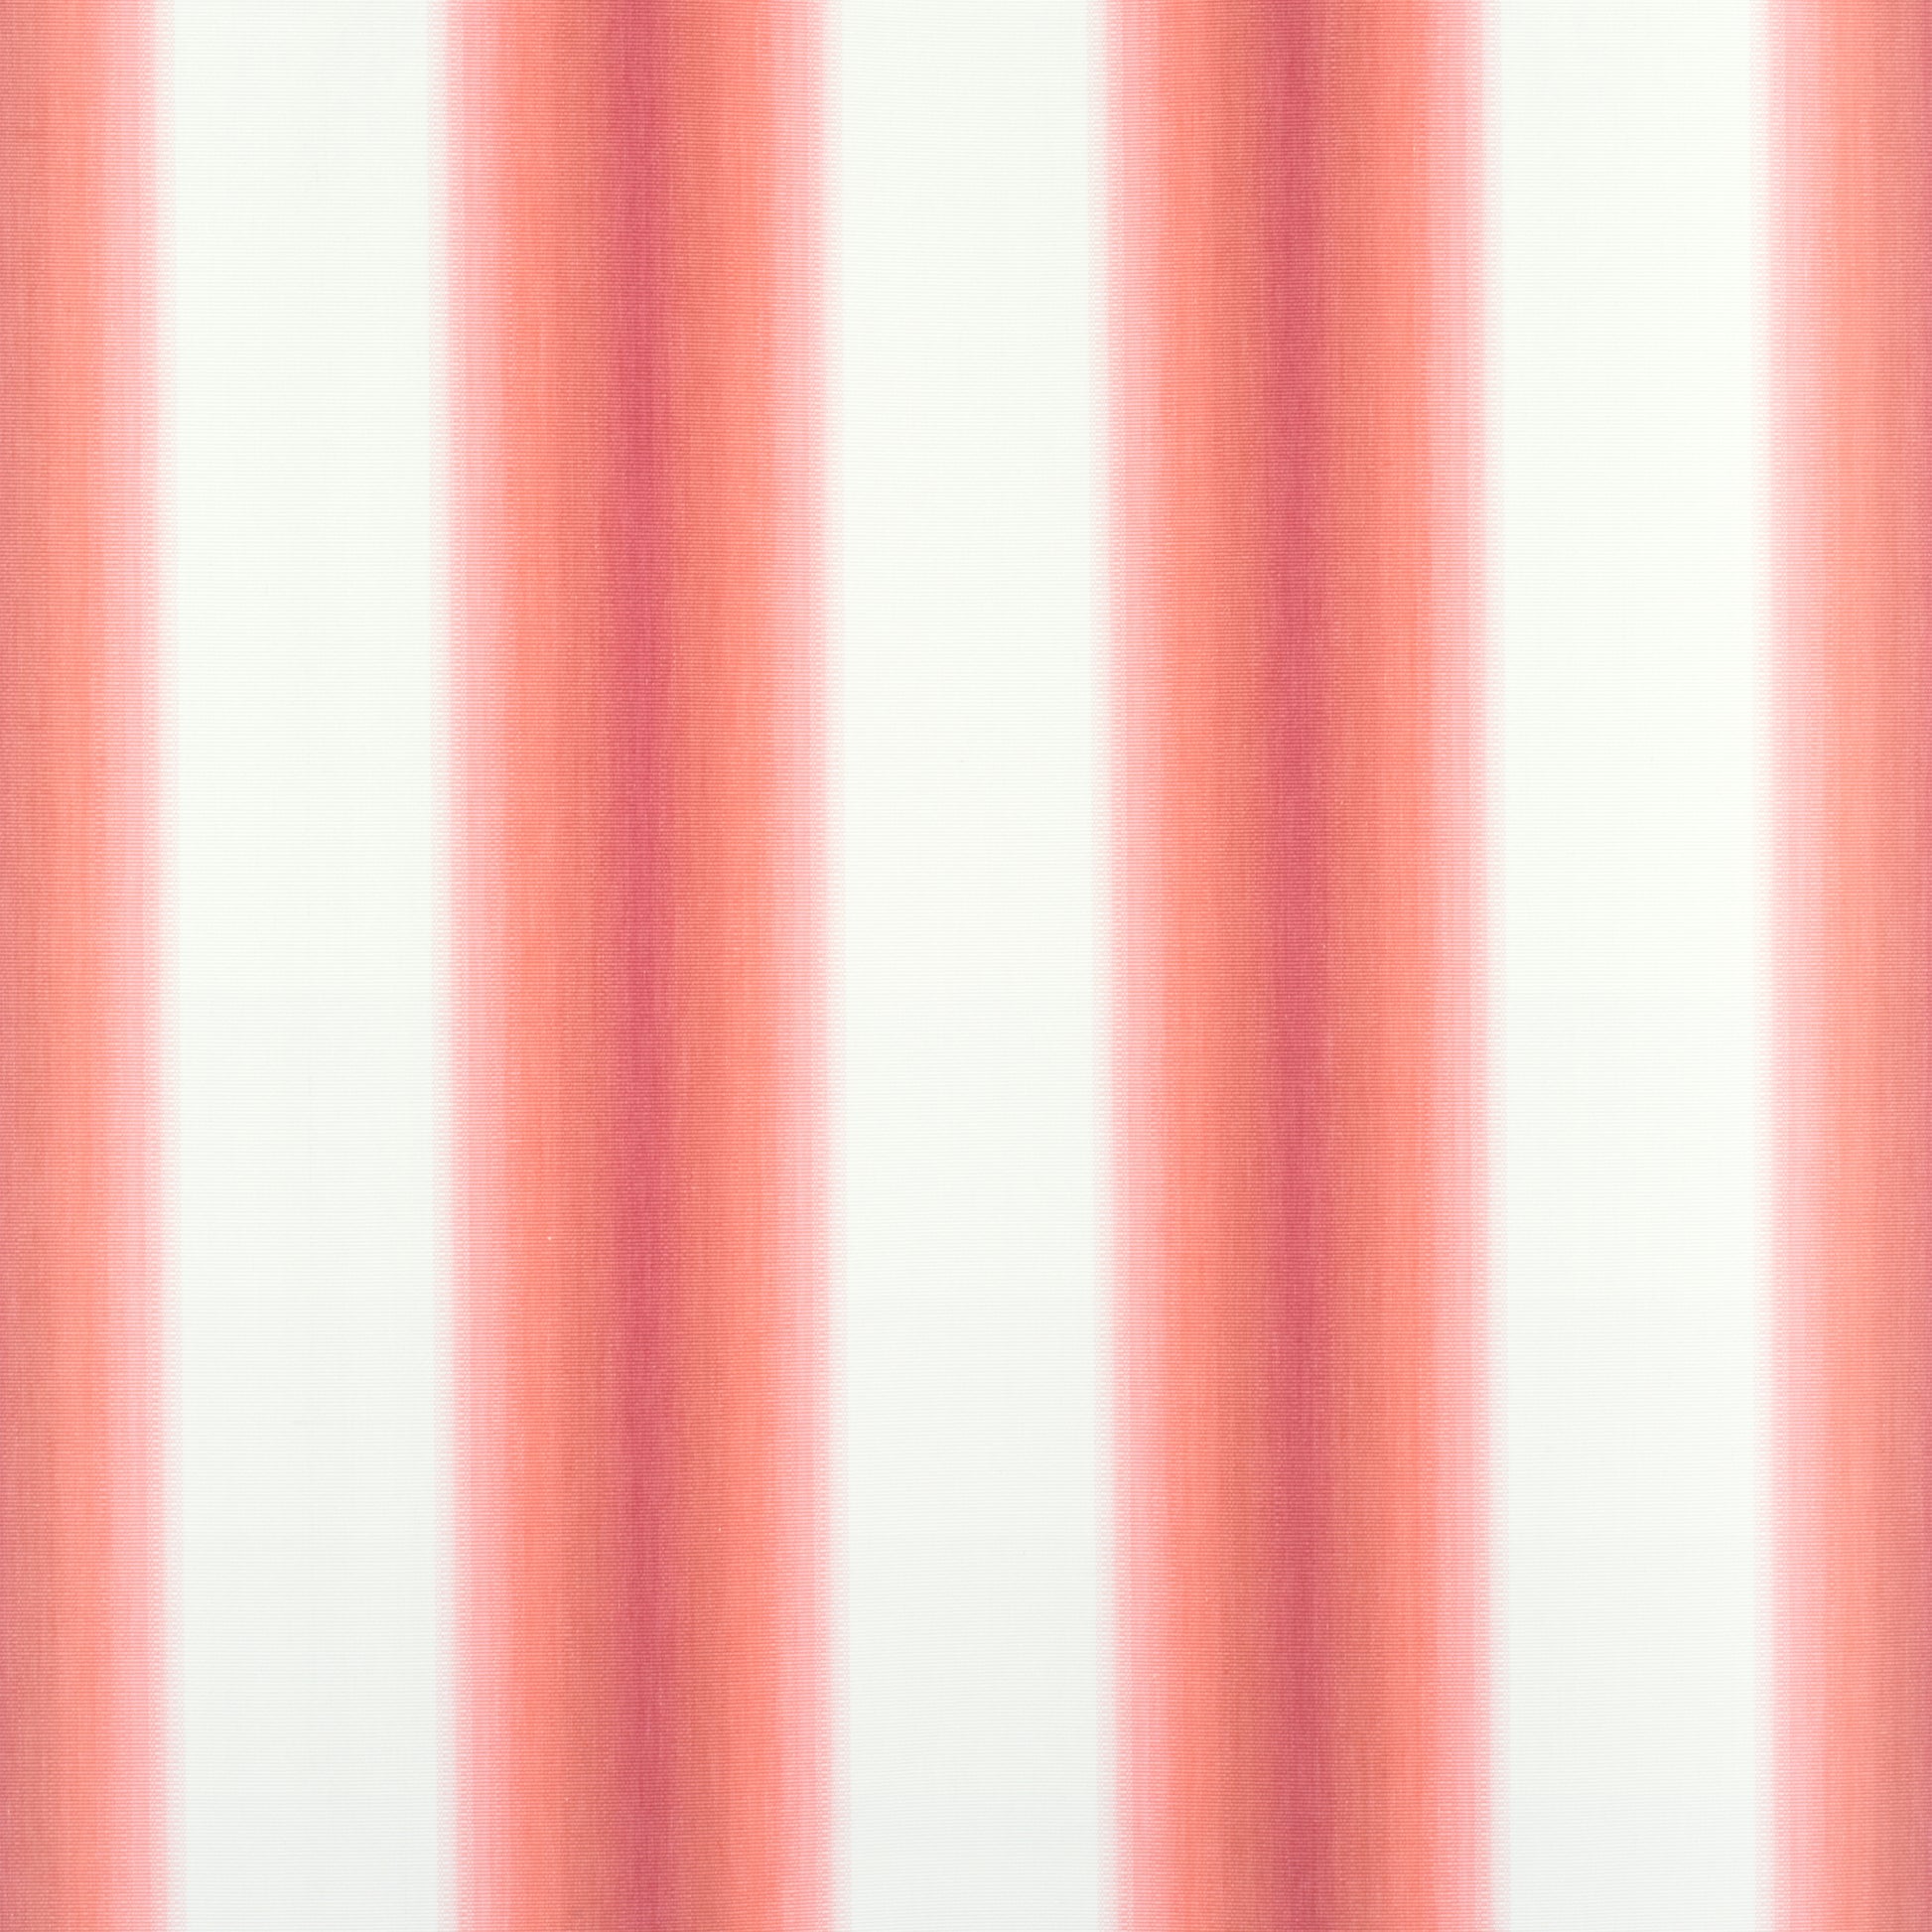 Purchase Thibaut Fabric Item# W775503 pattern name Stockton Stripe color Coral